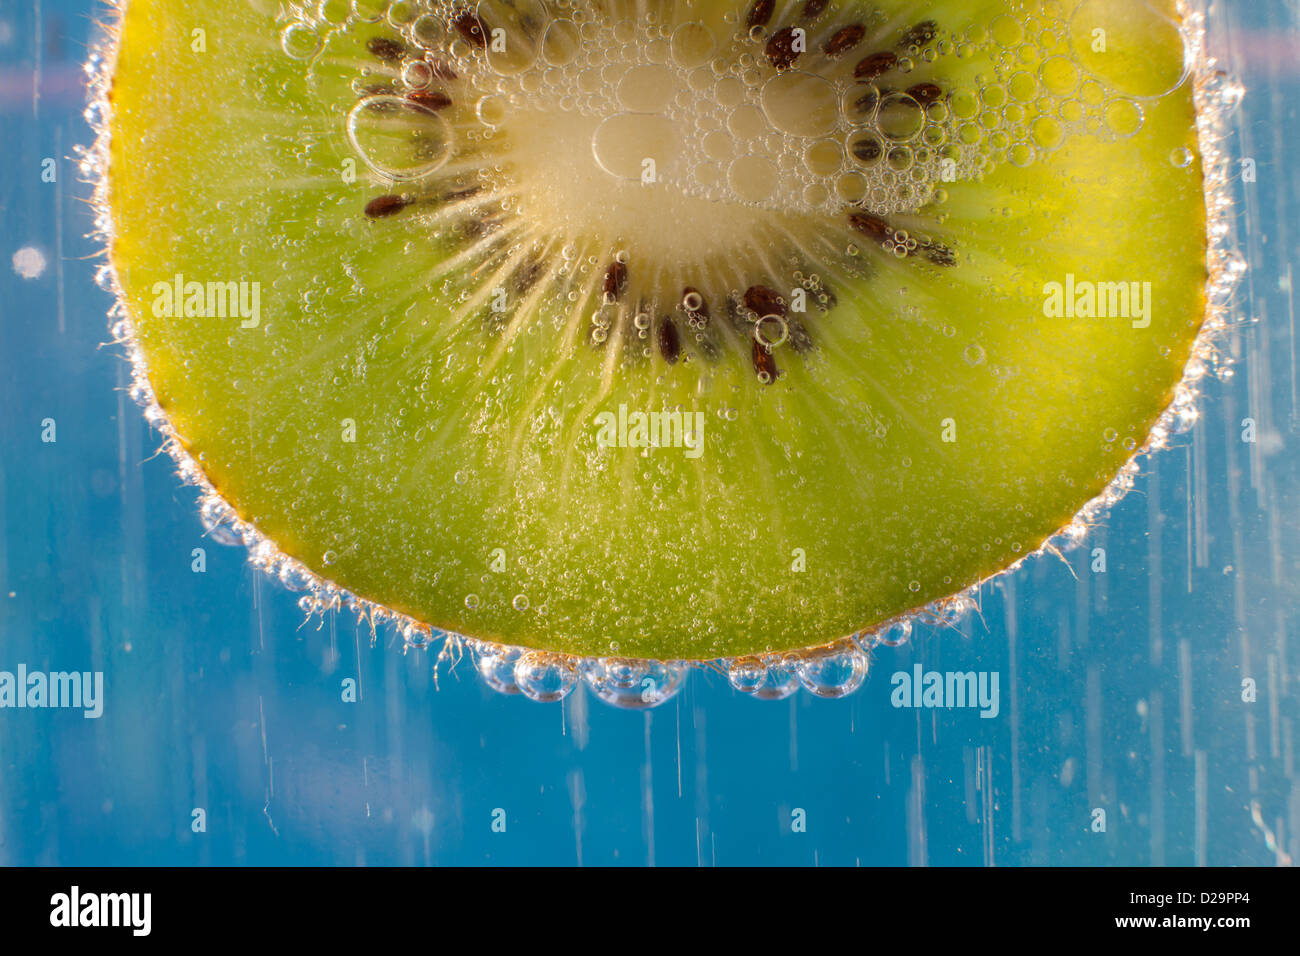 A slice of Kiwi fruit in a glass of sparkling mineral water Stock Photo